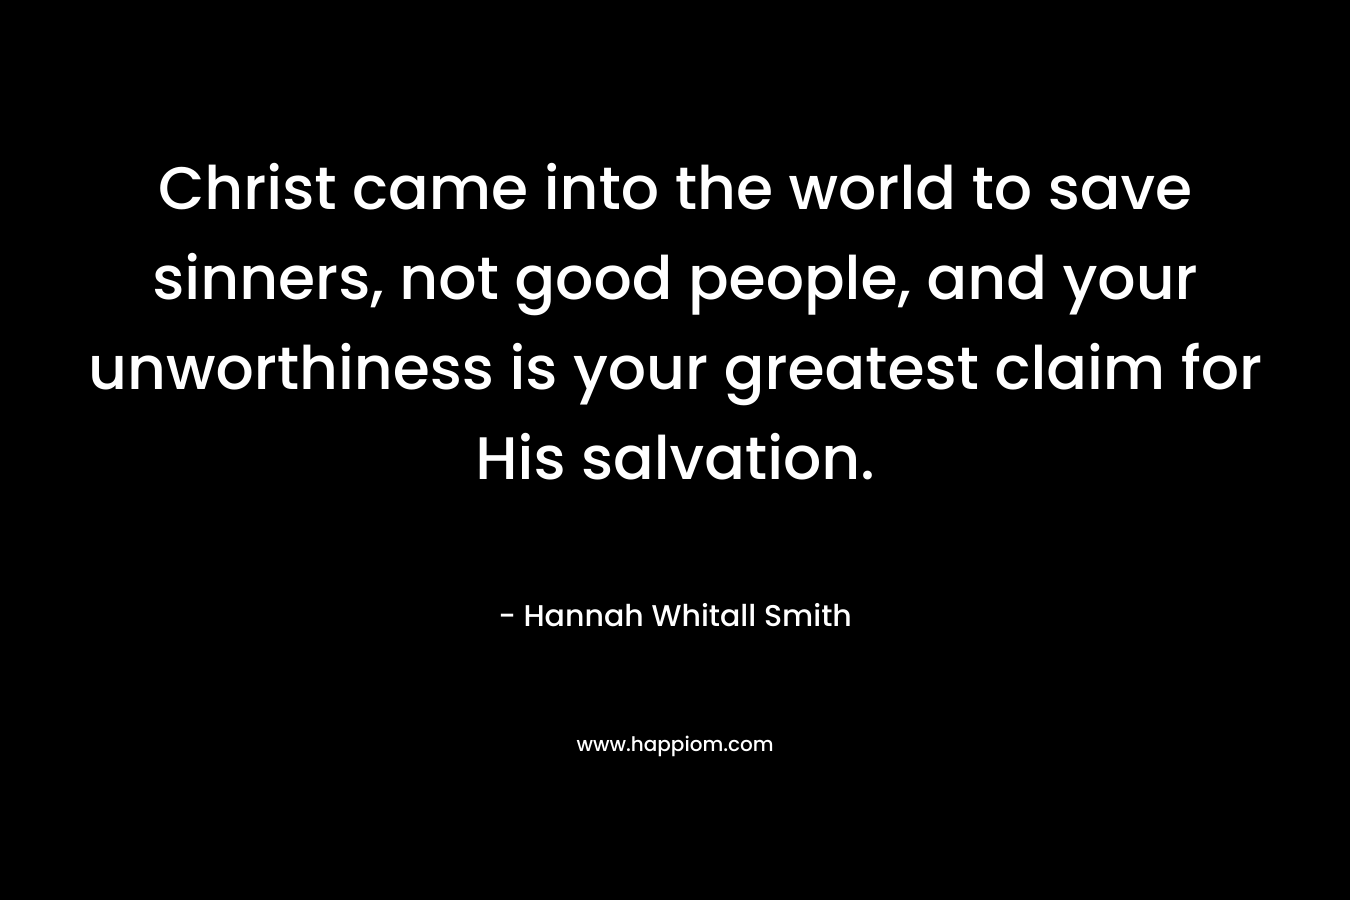 Christ came into the world to save sinners, not good people, and your unworthiness is your greatest claim for His salvation. – Hannah Whitall Smith